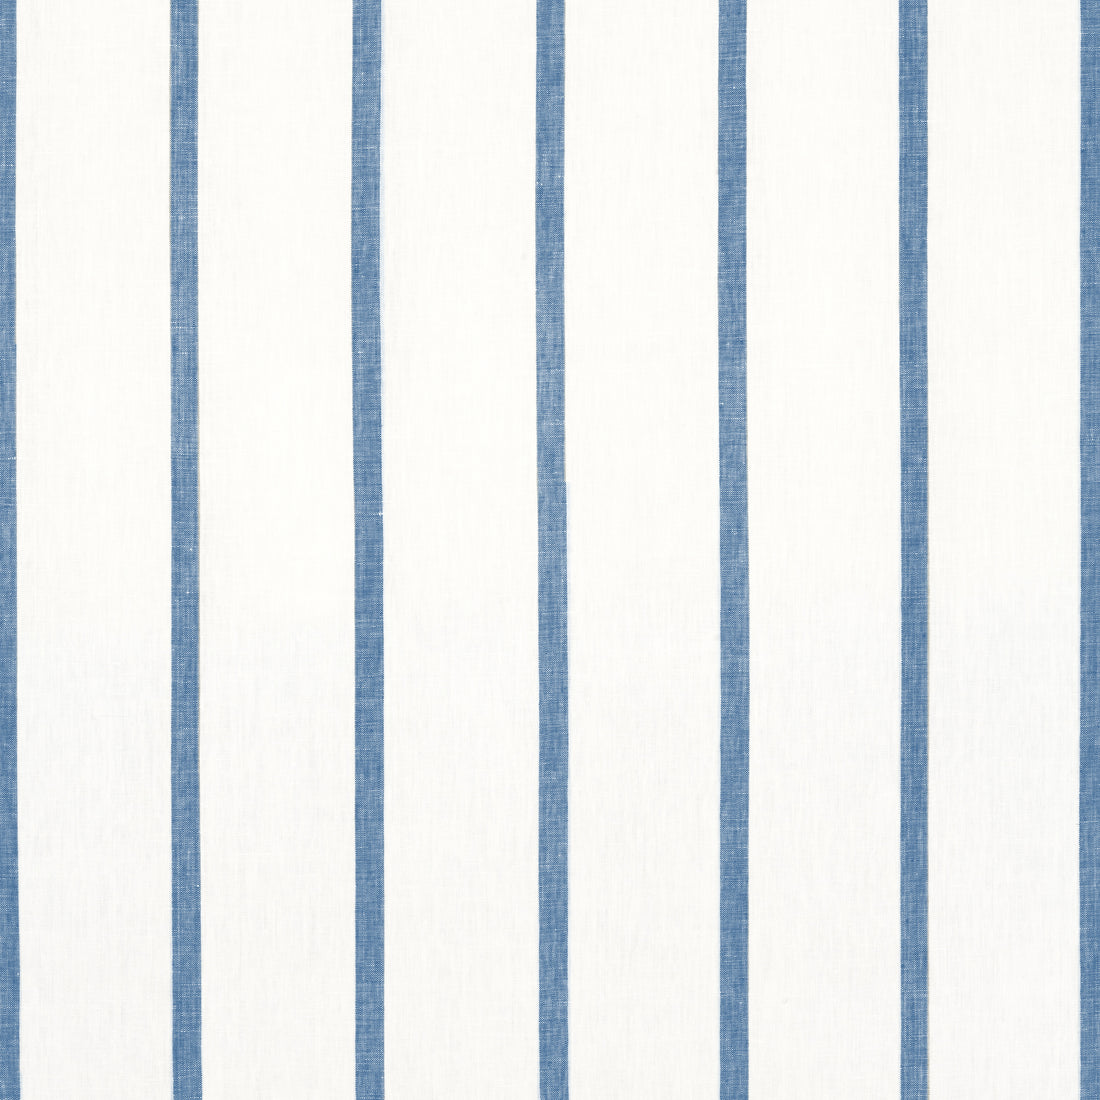 Sailing Stripe fabric in navy and white color - pattern number AW15131 - by Anna French in the Antilles collection